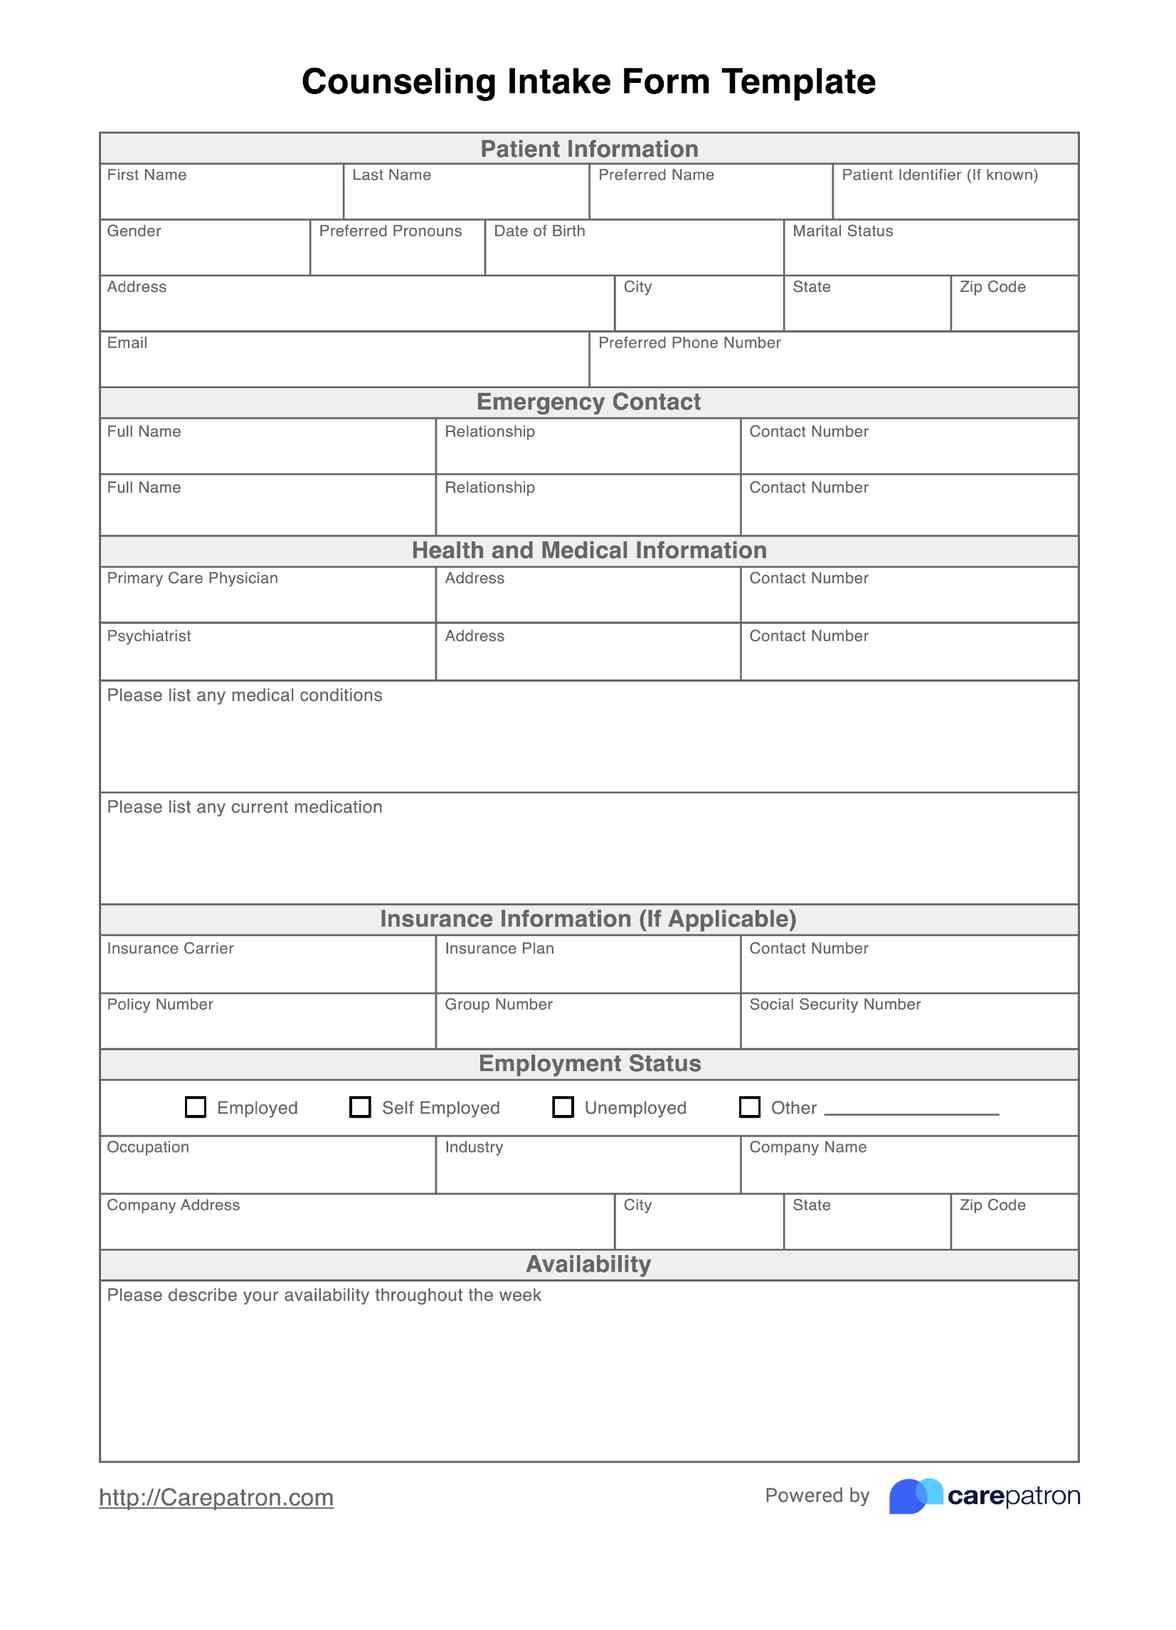 Counseling Intake Form PDF Example